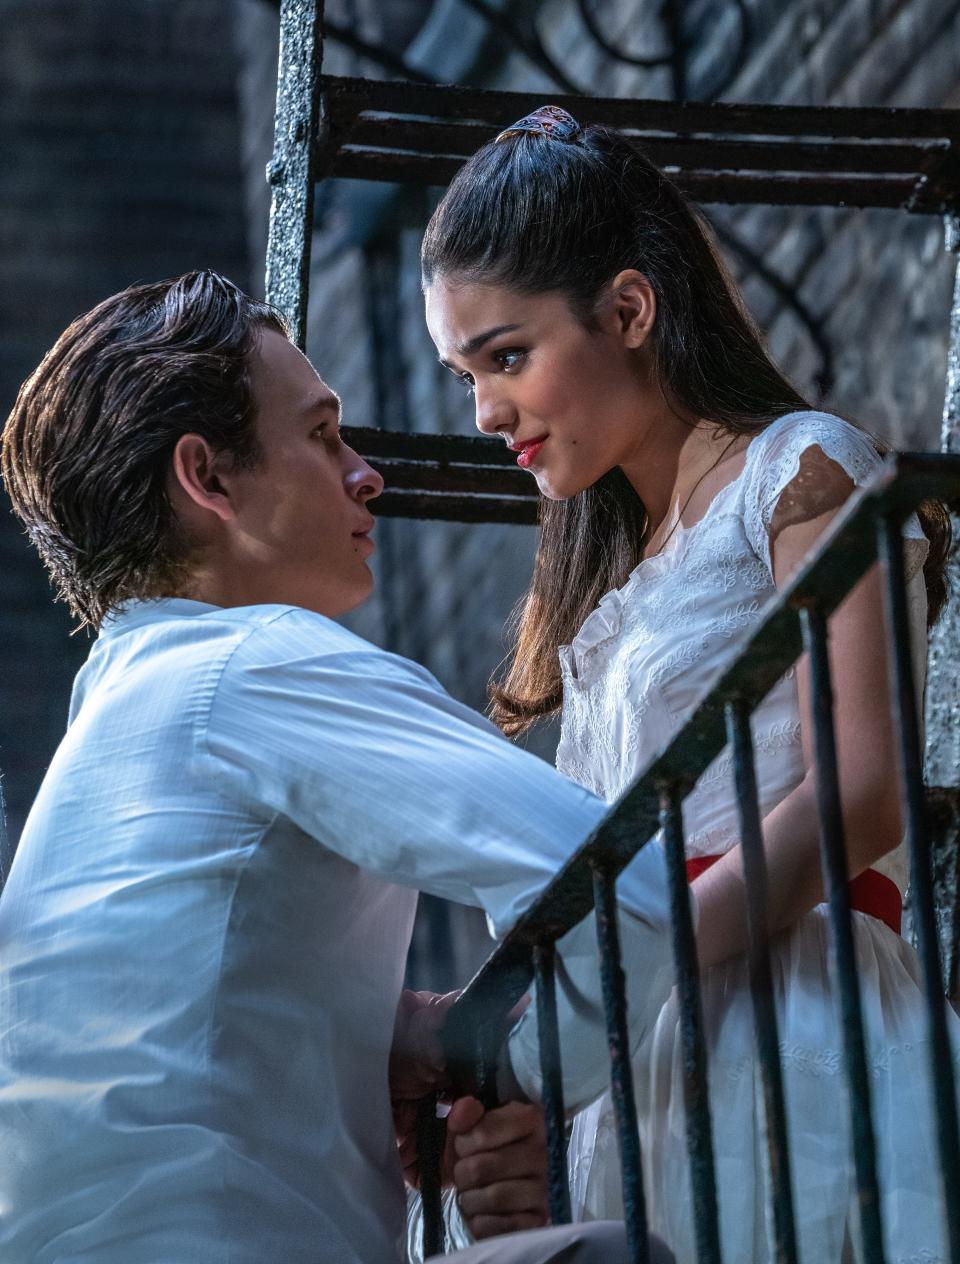 Ansel Elgort stars as Tony and Rachel Zegler is Maria in the  musical "West Side Story," directed by Steven Spielberg.